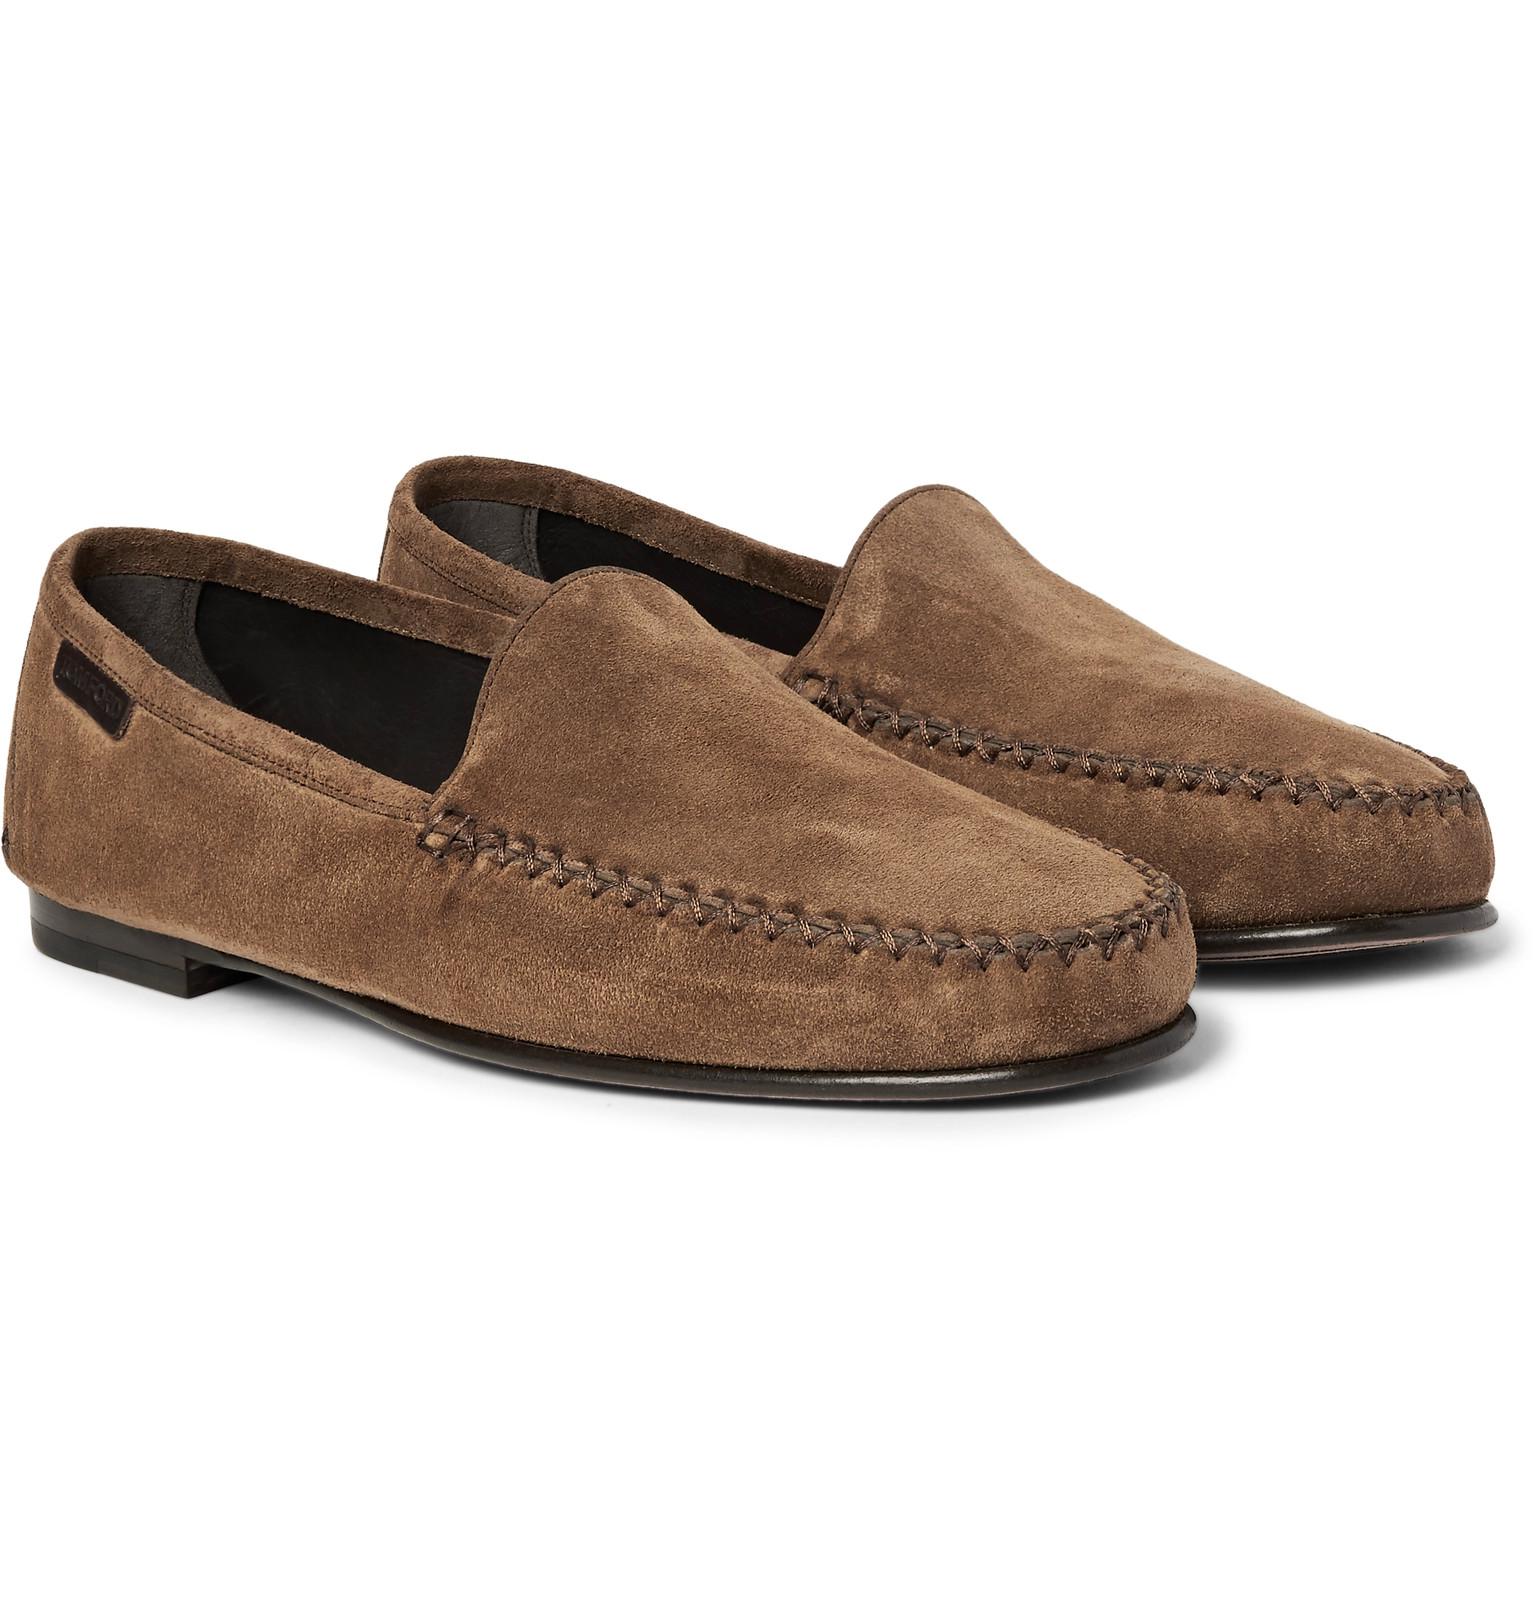 Lyst - Tom Ford Howard Suede Loafers in Brown for Men